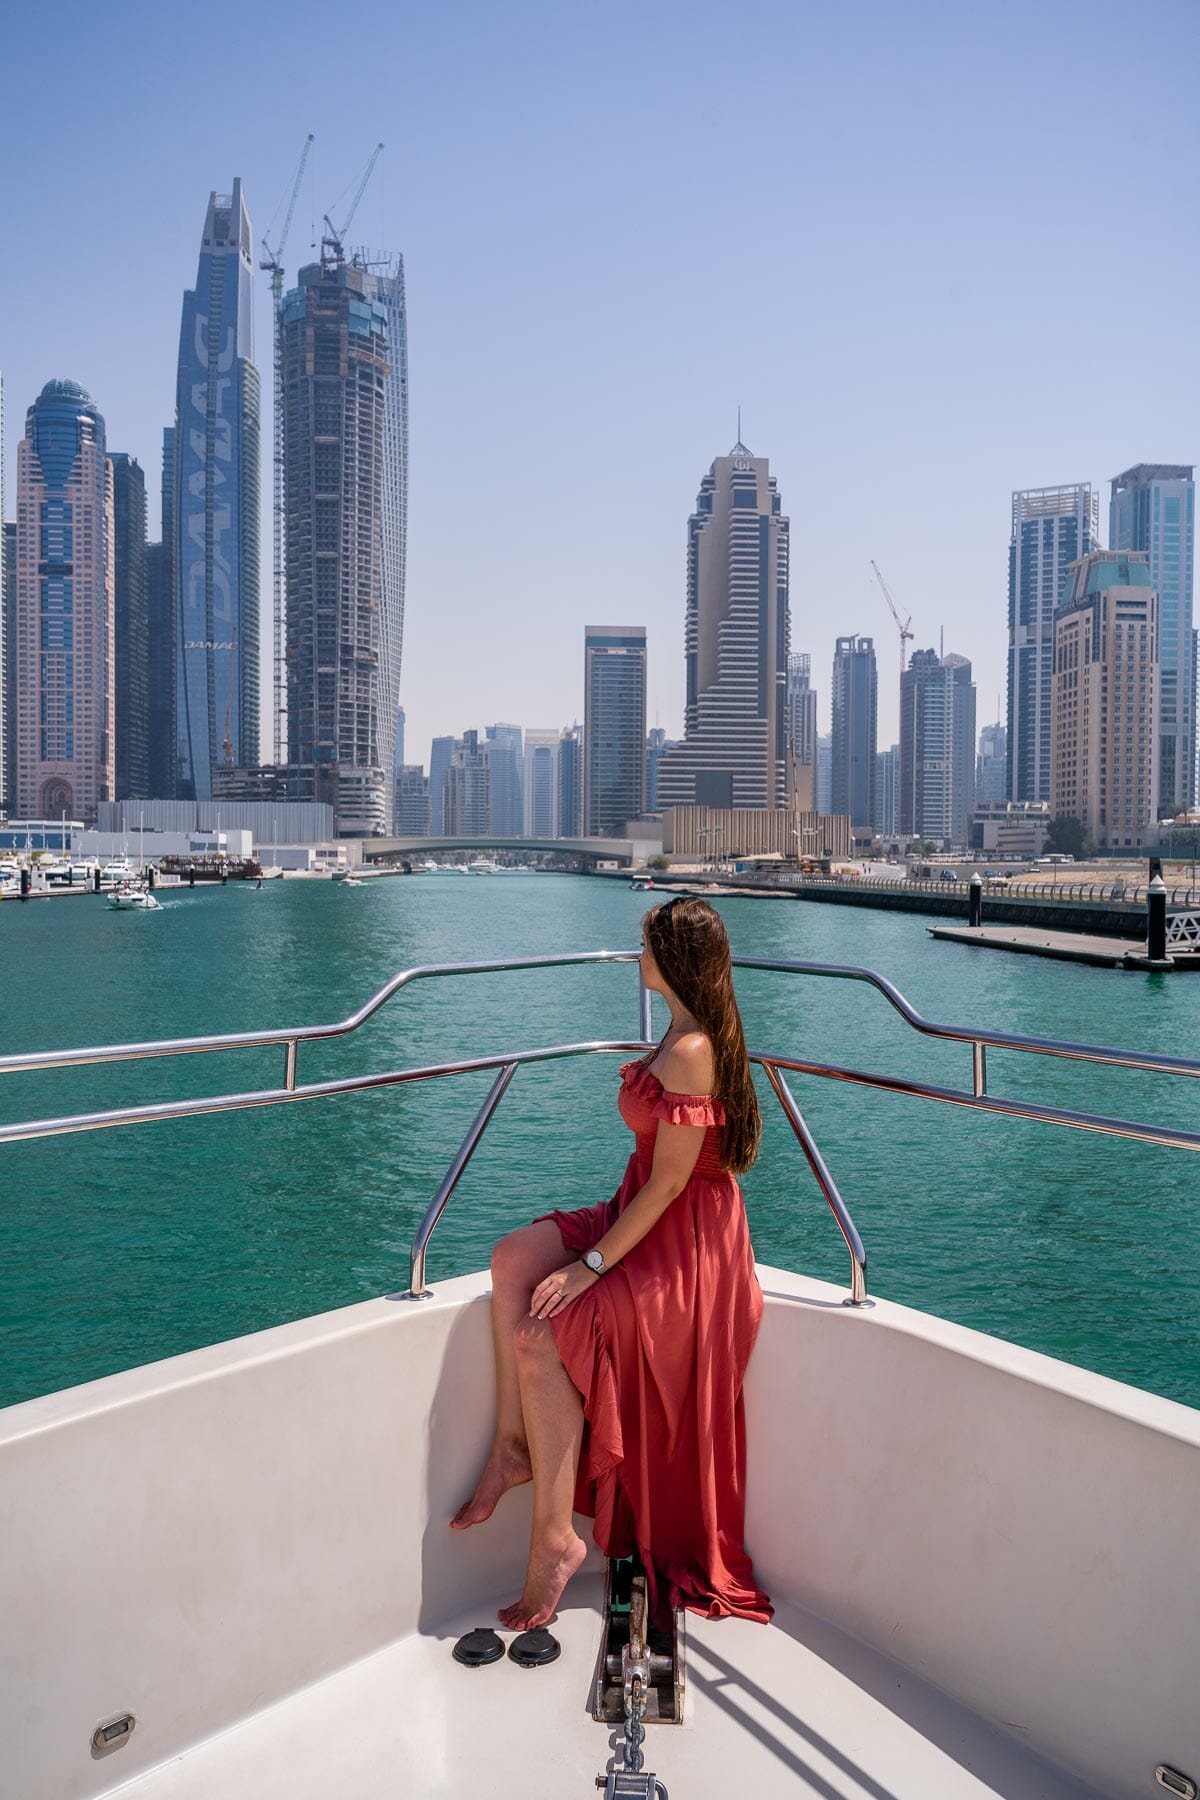 Girl on a yacht with Dubai Marina in the background